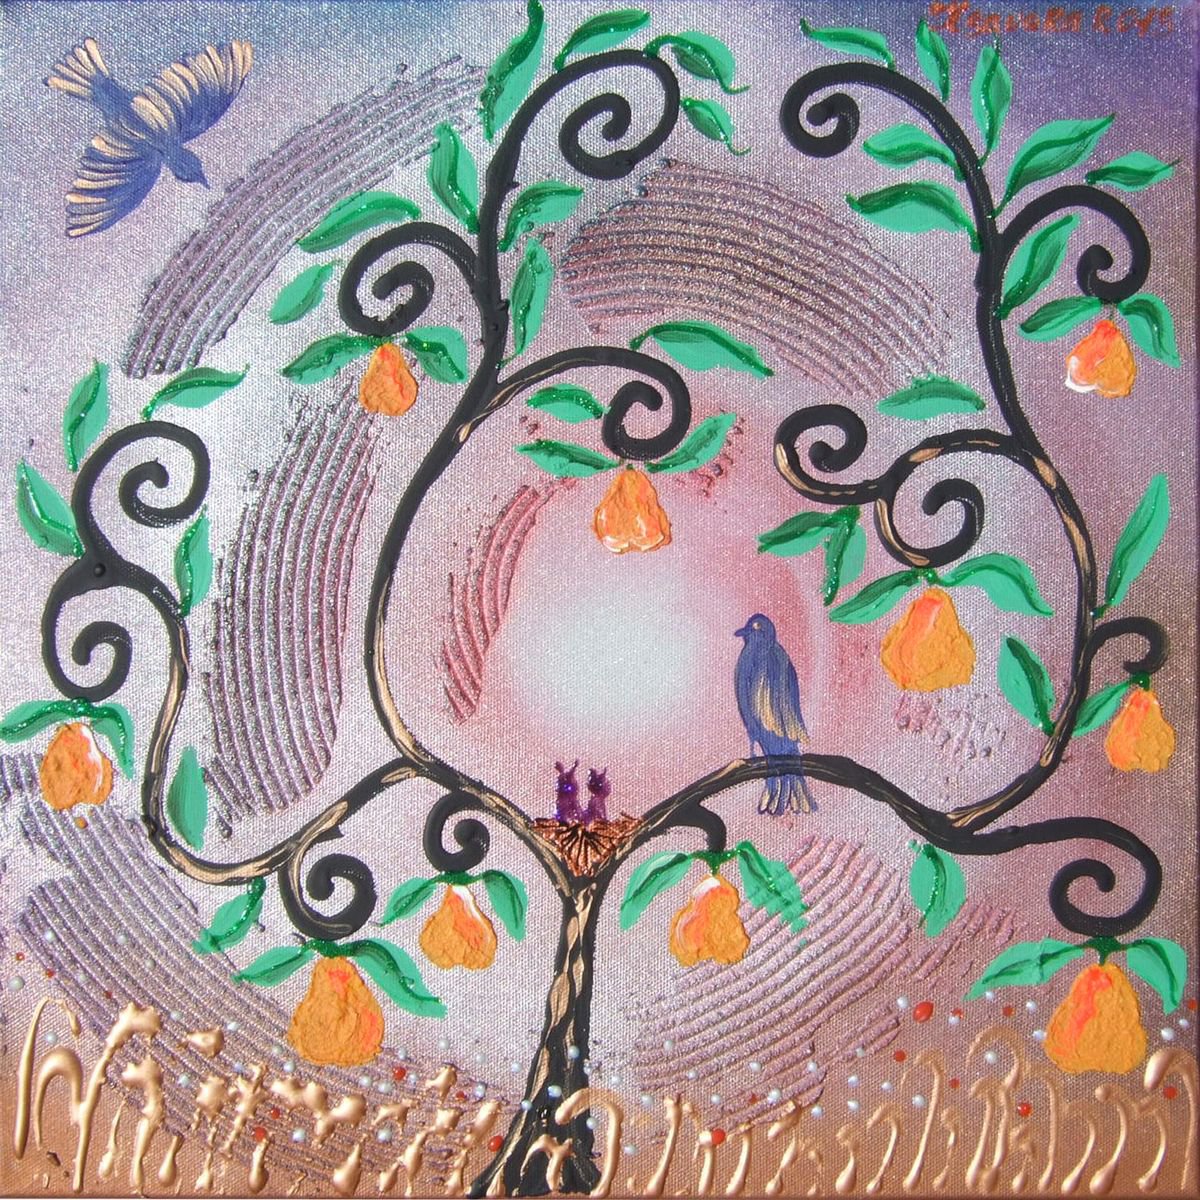 Pear tree and blue birds textured painting T014 original floral art 40x40x2 cm stretched... by Ksavera